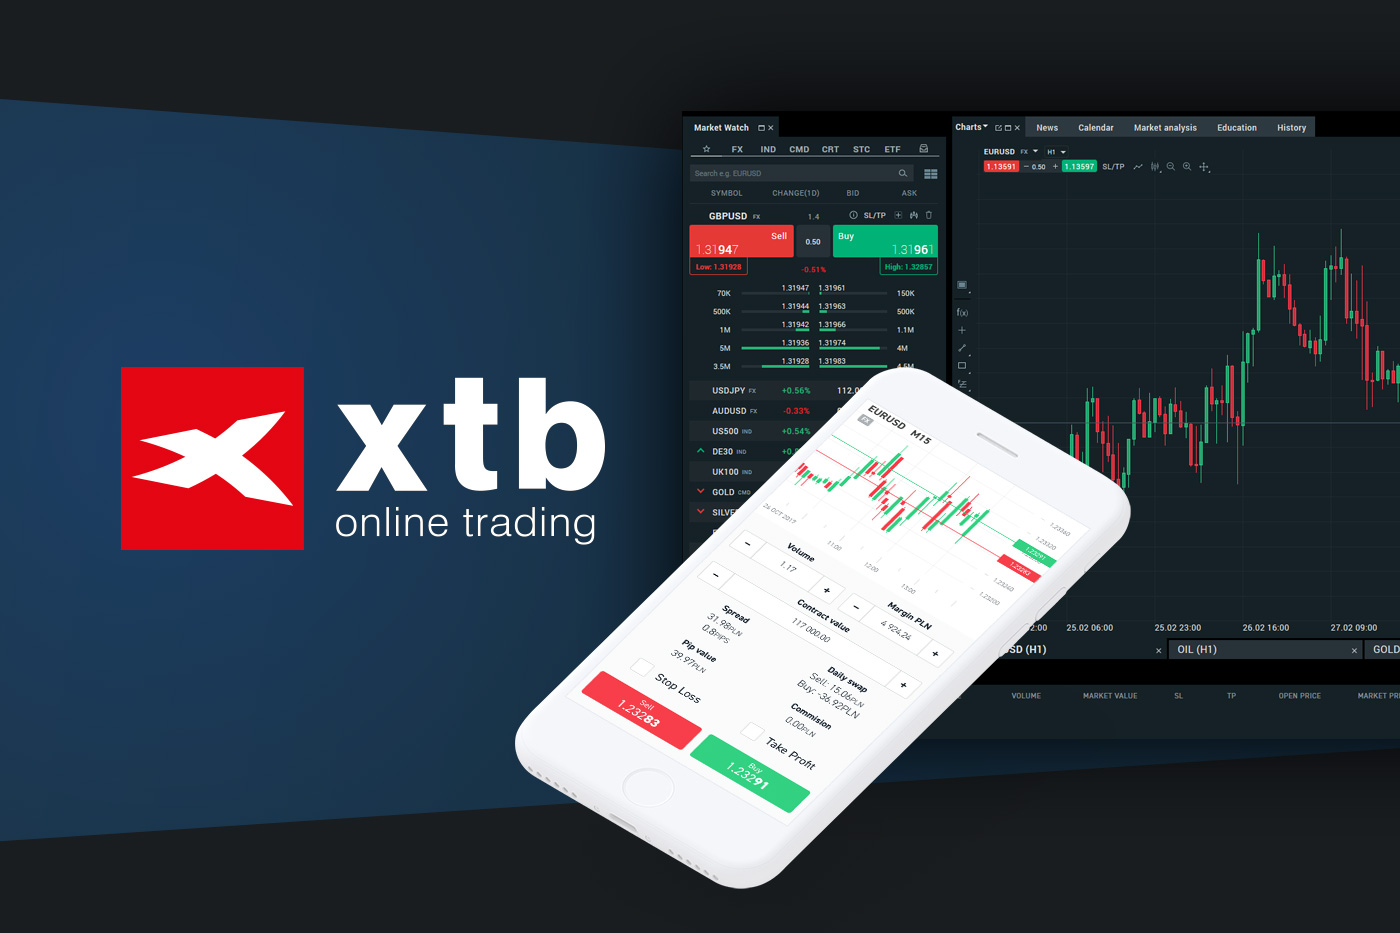 XTB bolsters presence in the MENA region with expanded stock offerings